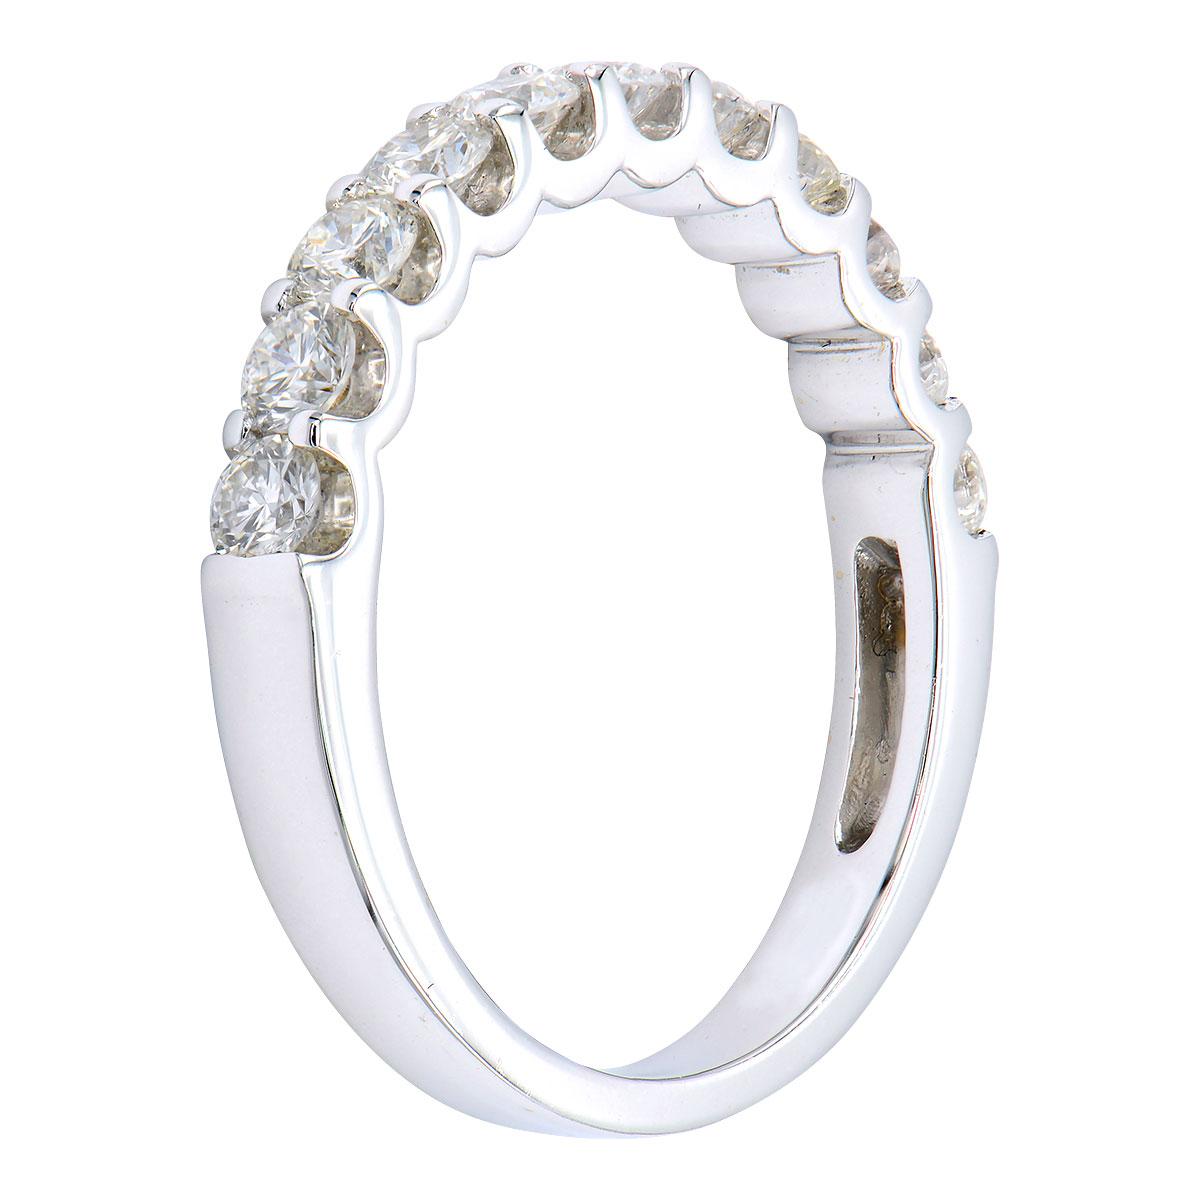 This stunning modern take on a classic diamond band is made from 2.9 grams of 18 karat white gold. Set in the gold are 11 round VS2, G color diamonds totaling 0.88 carats which go halfway around the band. From the side of the ring, the prongs are